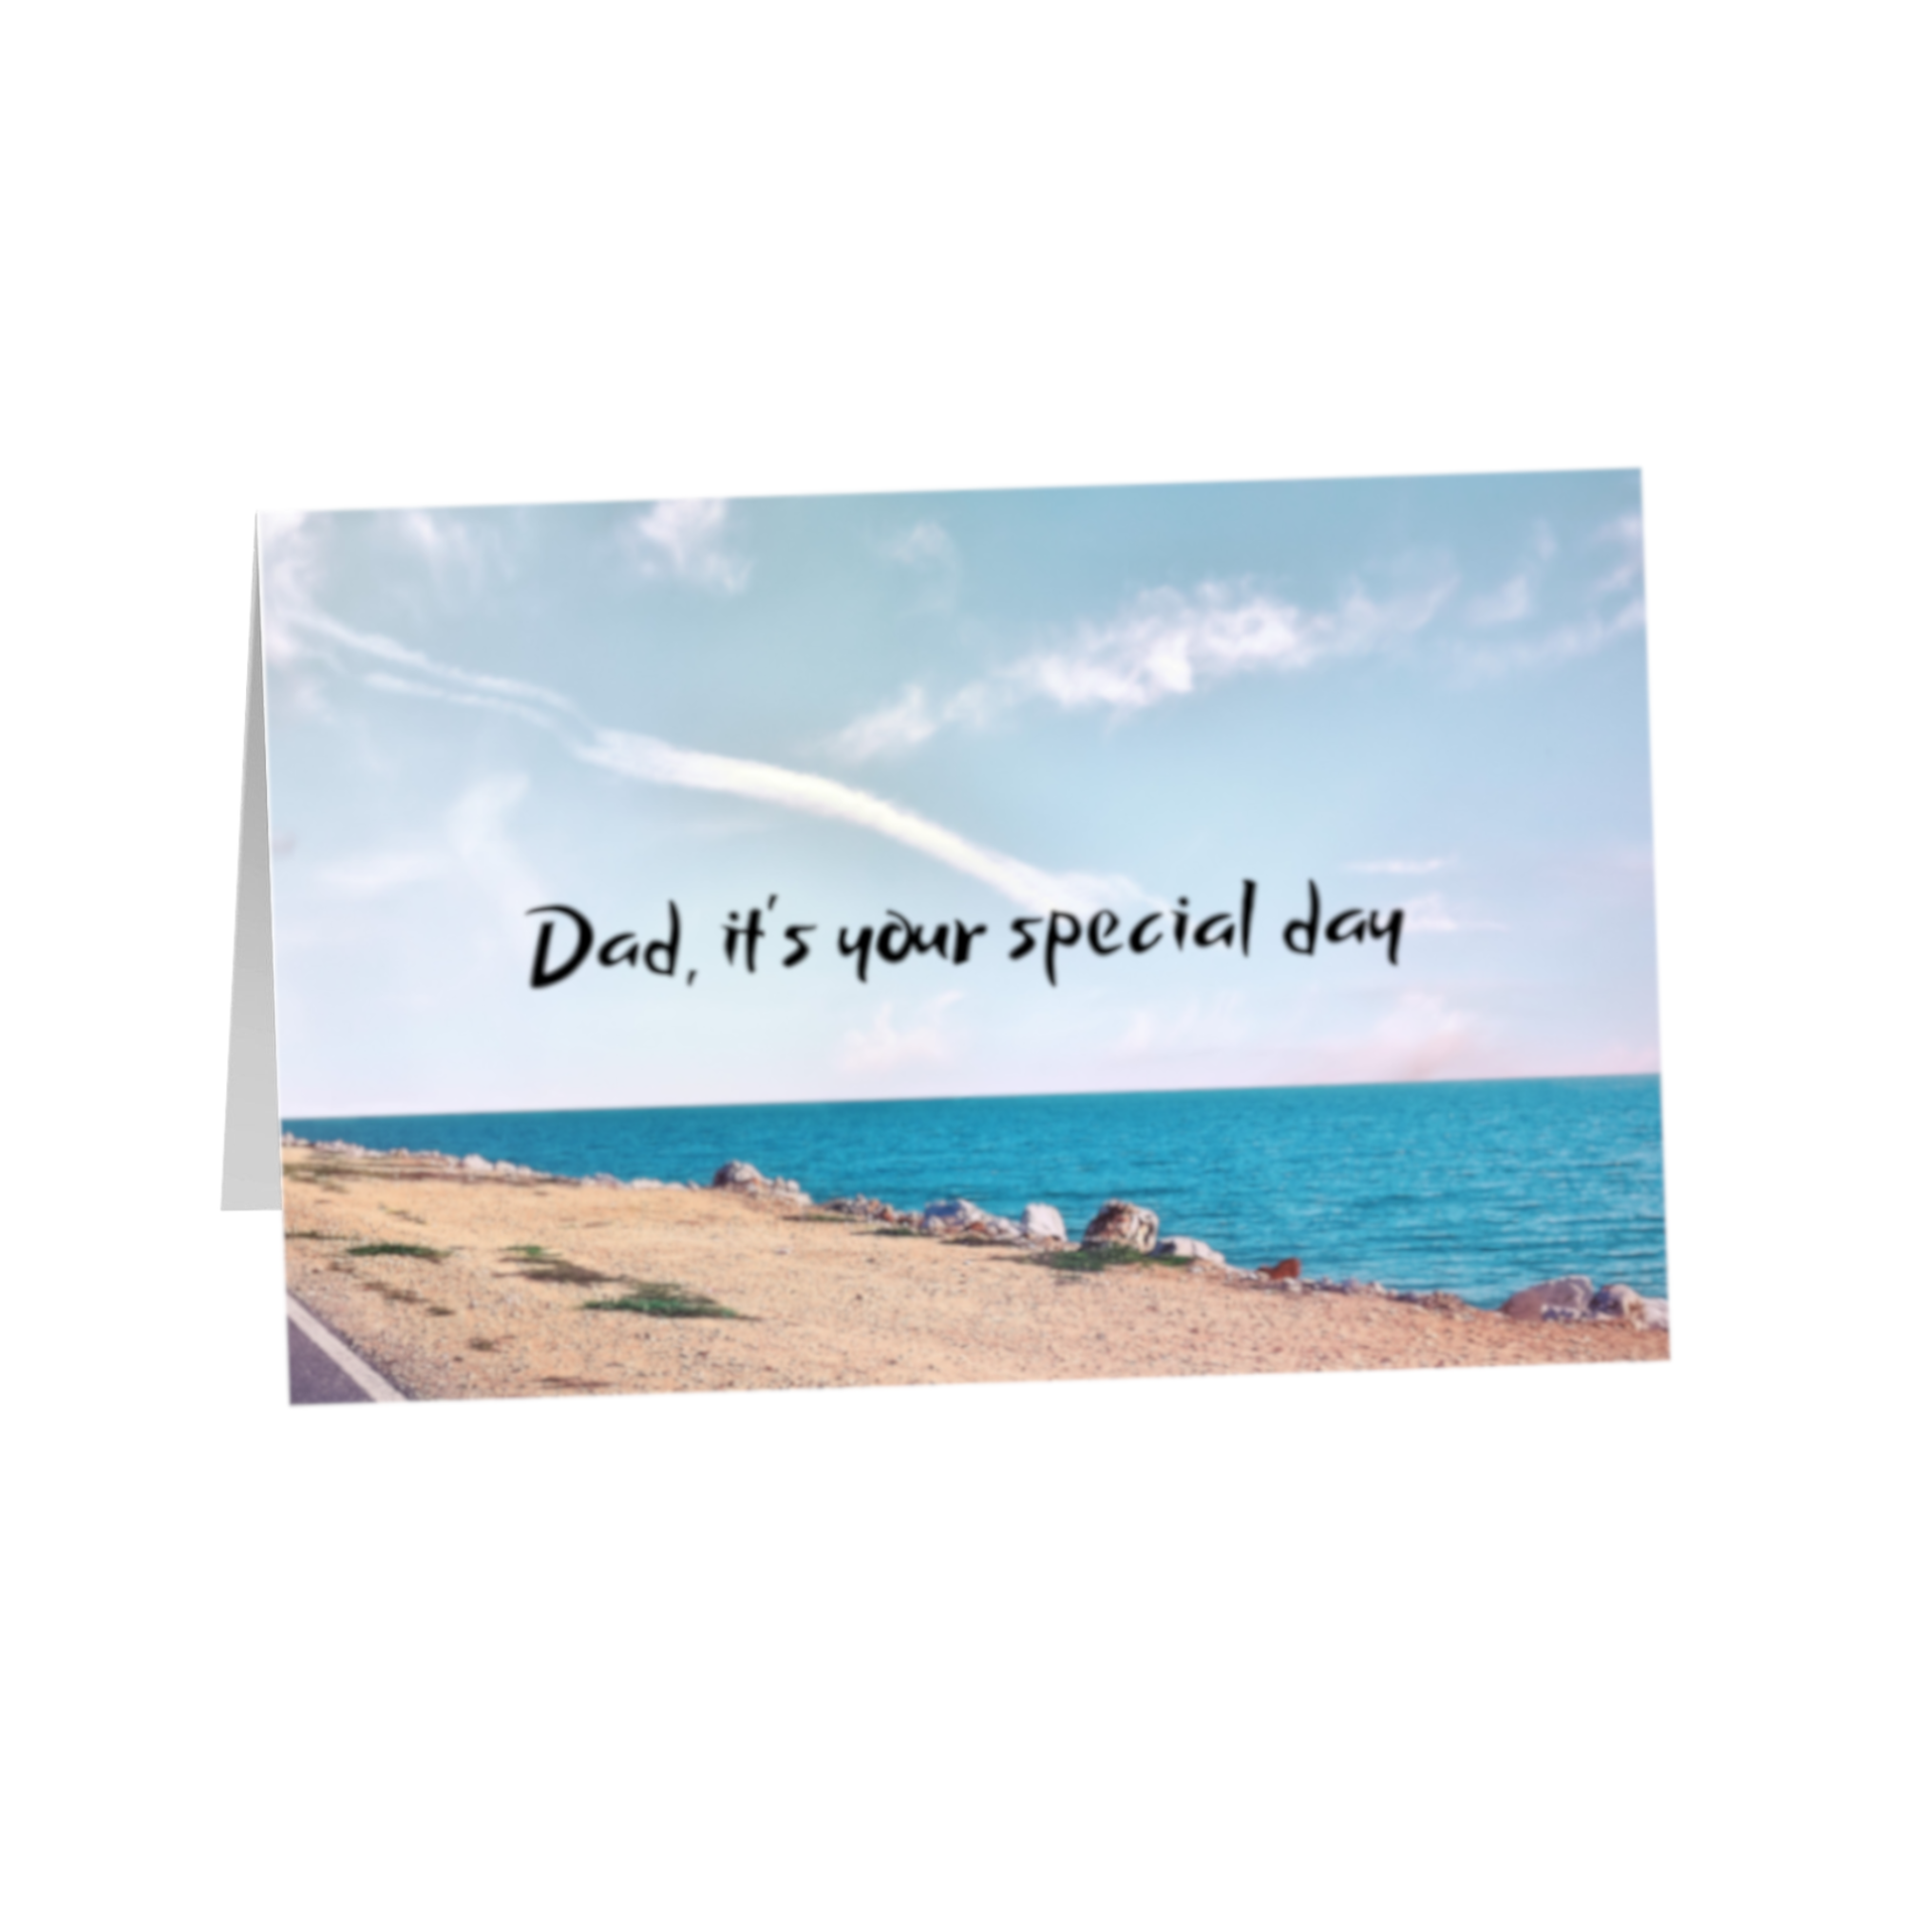 Dad, it's your special day... 8.5x5.5 Greeting Card